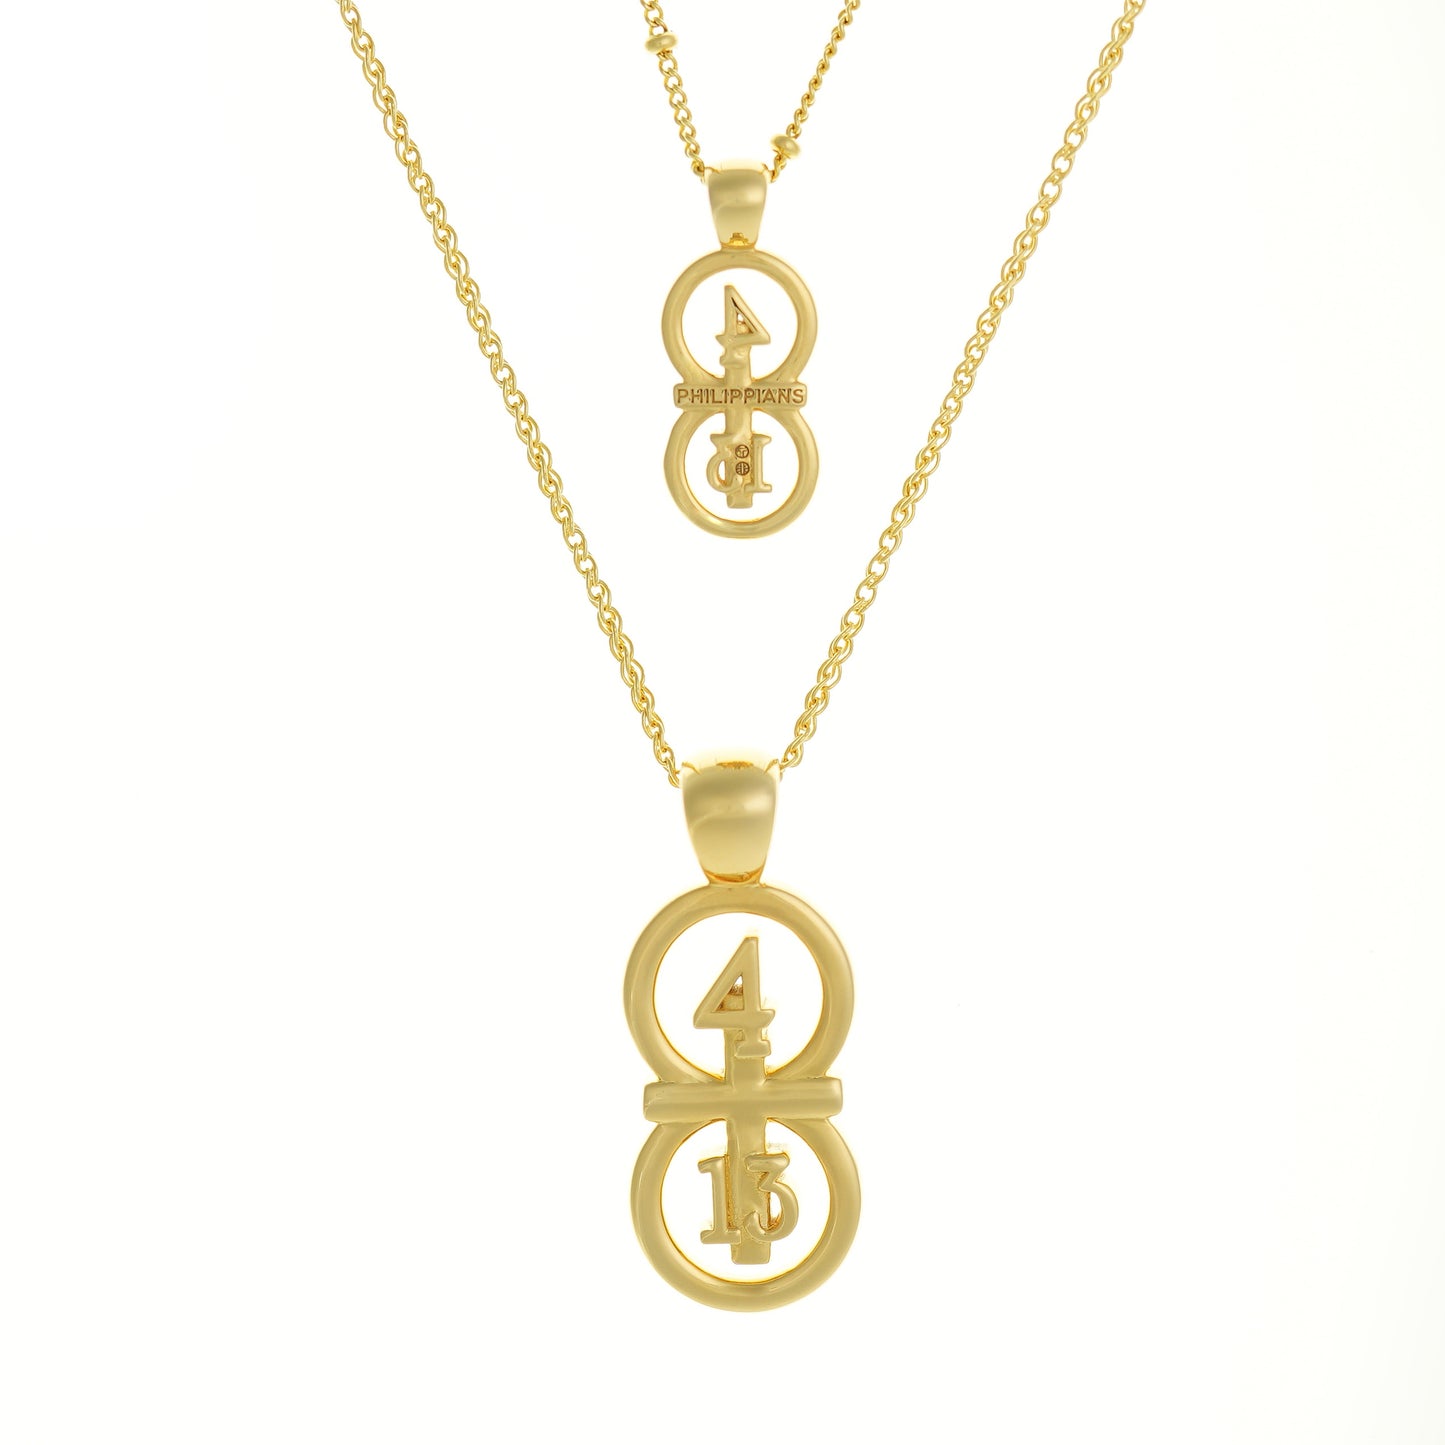 Gold small and large pendants displayed on a white background with our 14k gold filled satellite chain paired with the small pendant and our 14k gold filled Rolo chain paired with the larger pendant.  Our 29 and 11® pendant has the numbers 4 and 13 intertwined with the cross to represent Philippians 4:13 with the chapter word "Philippians" inscribed on the back.